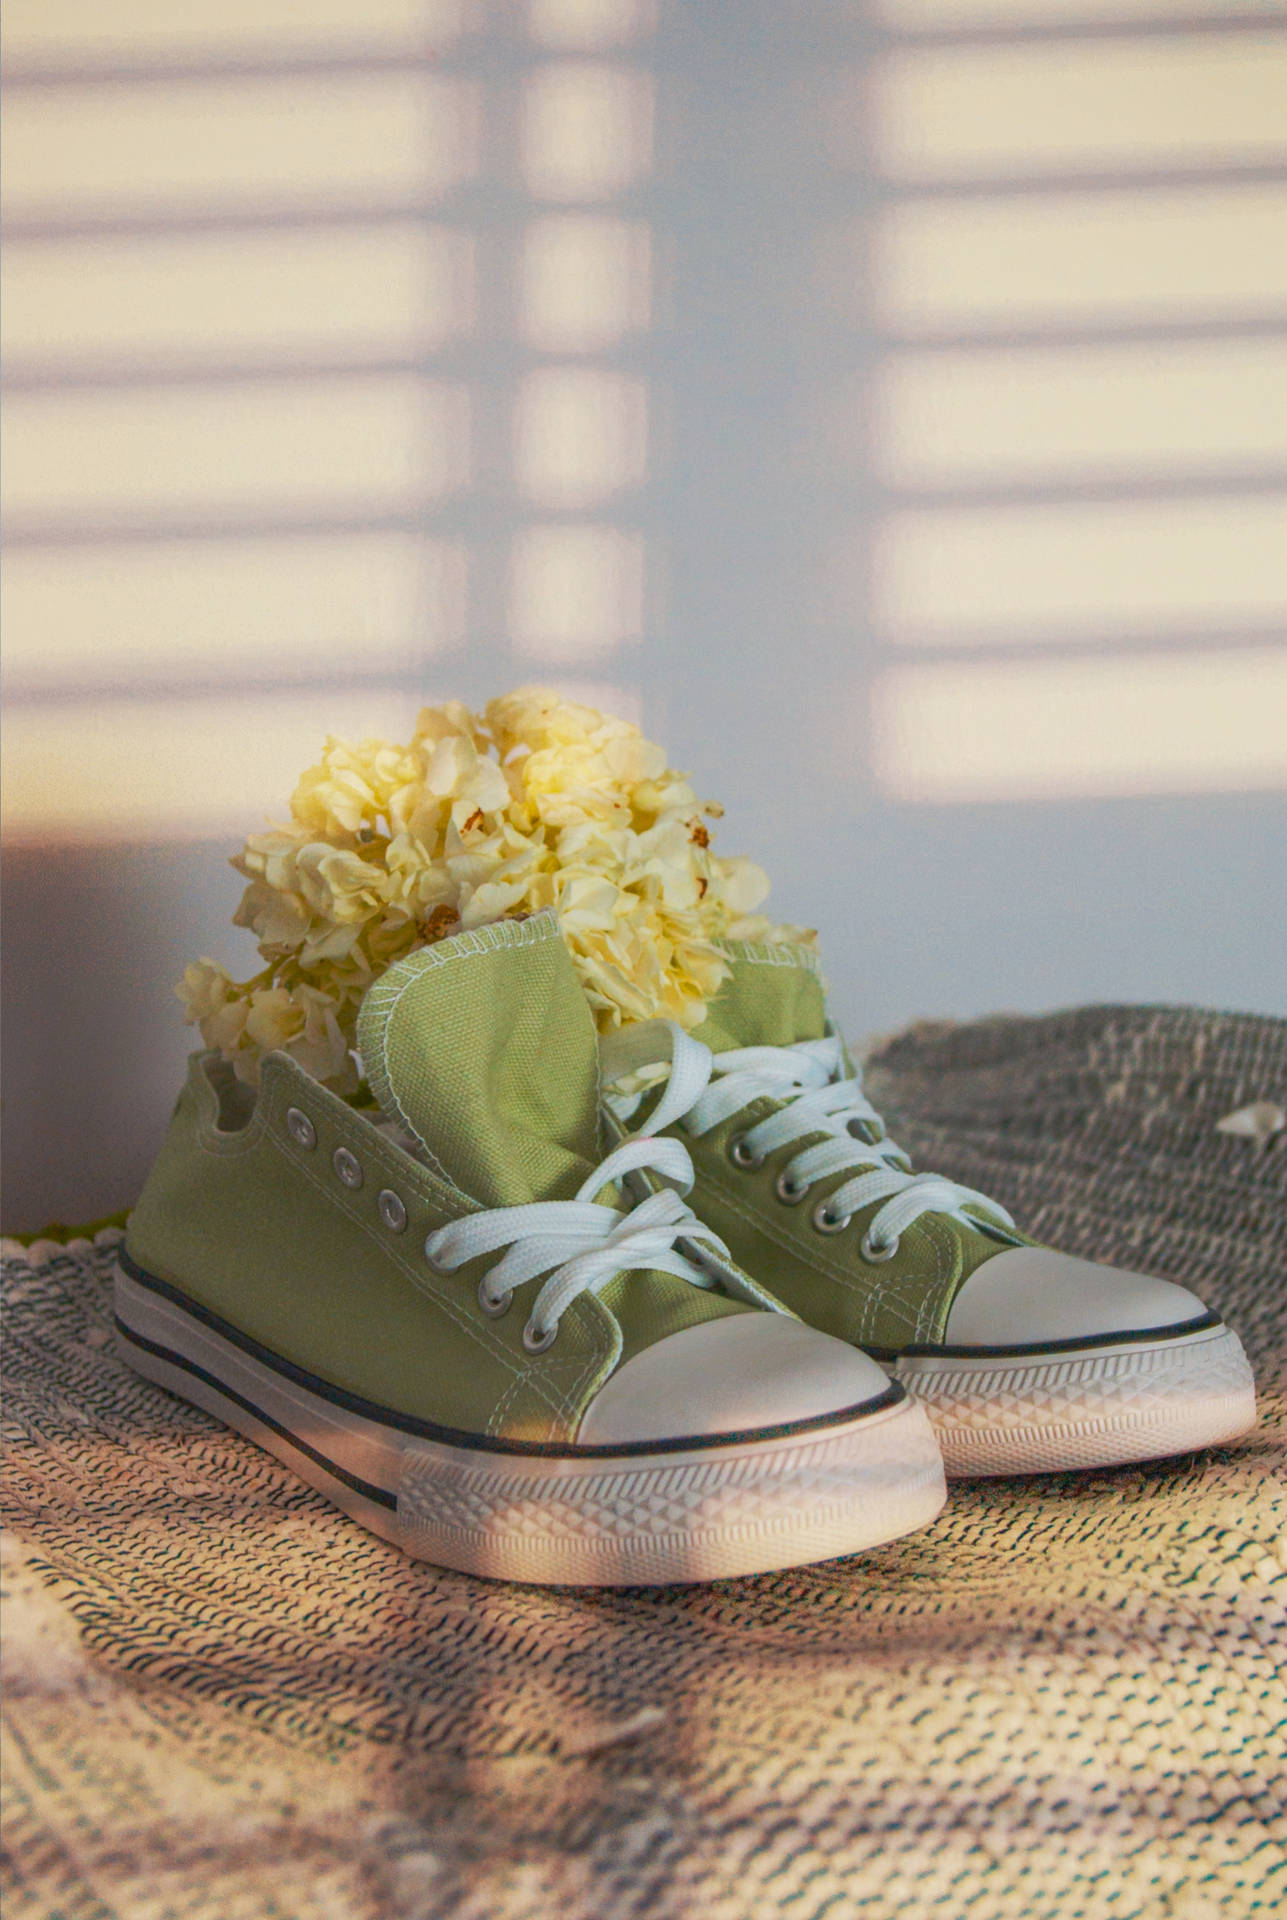 Embrace The Style And Comfort Of These Sleek Green Converse Sneakers.